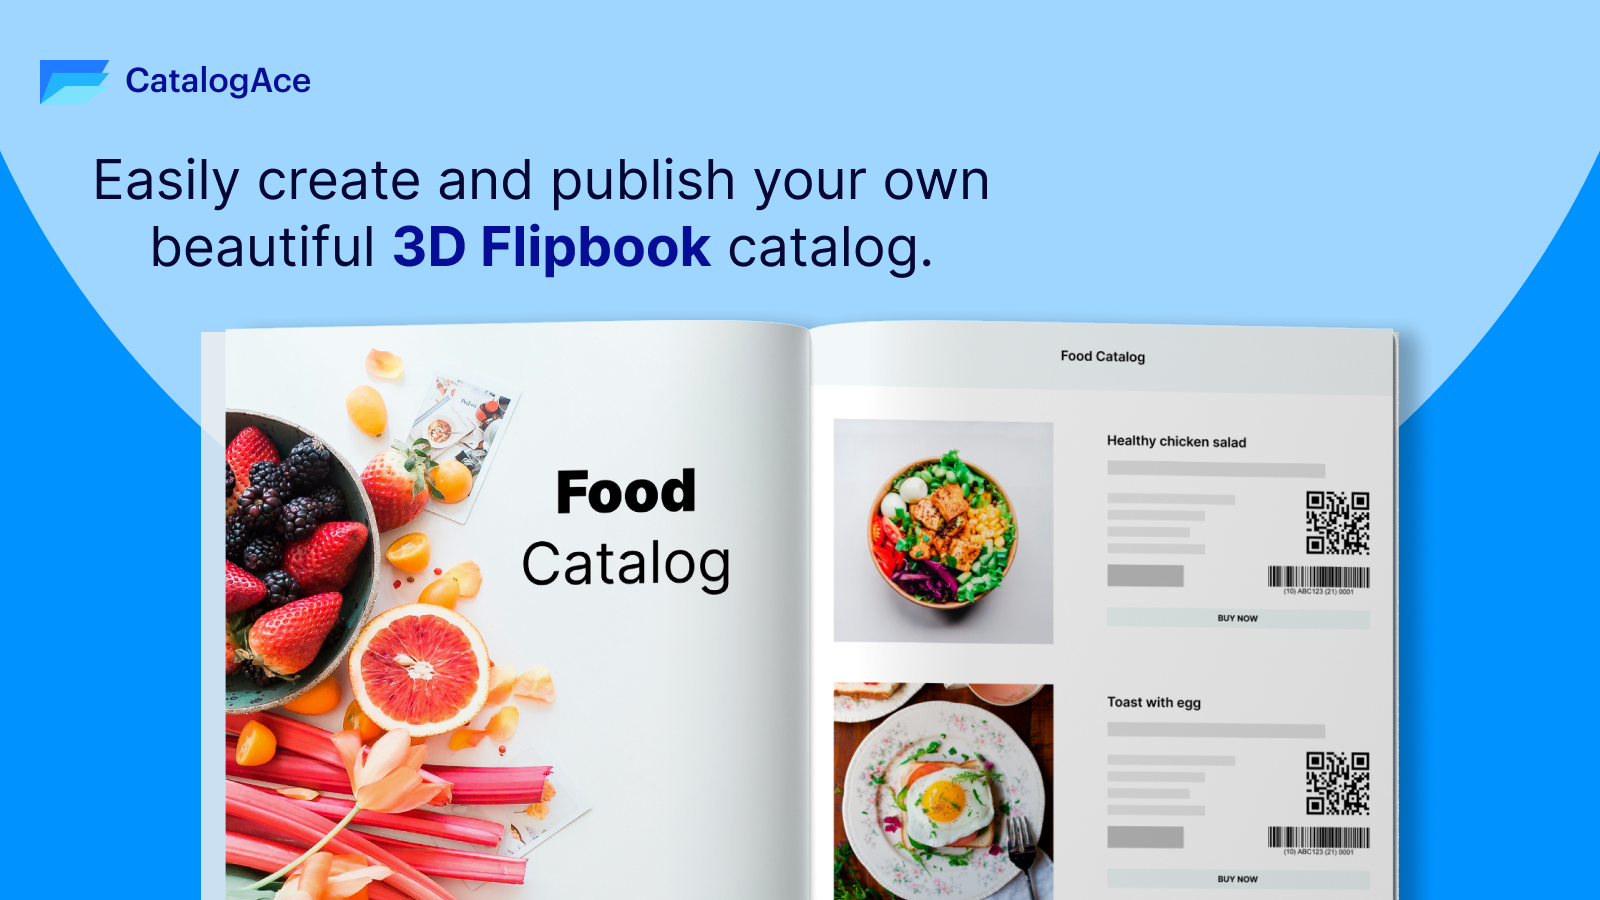 Easily create and publish your own beautiful 3D Flipbook